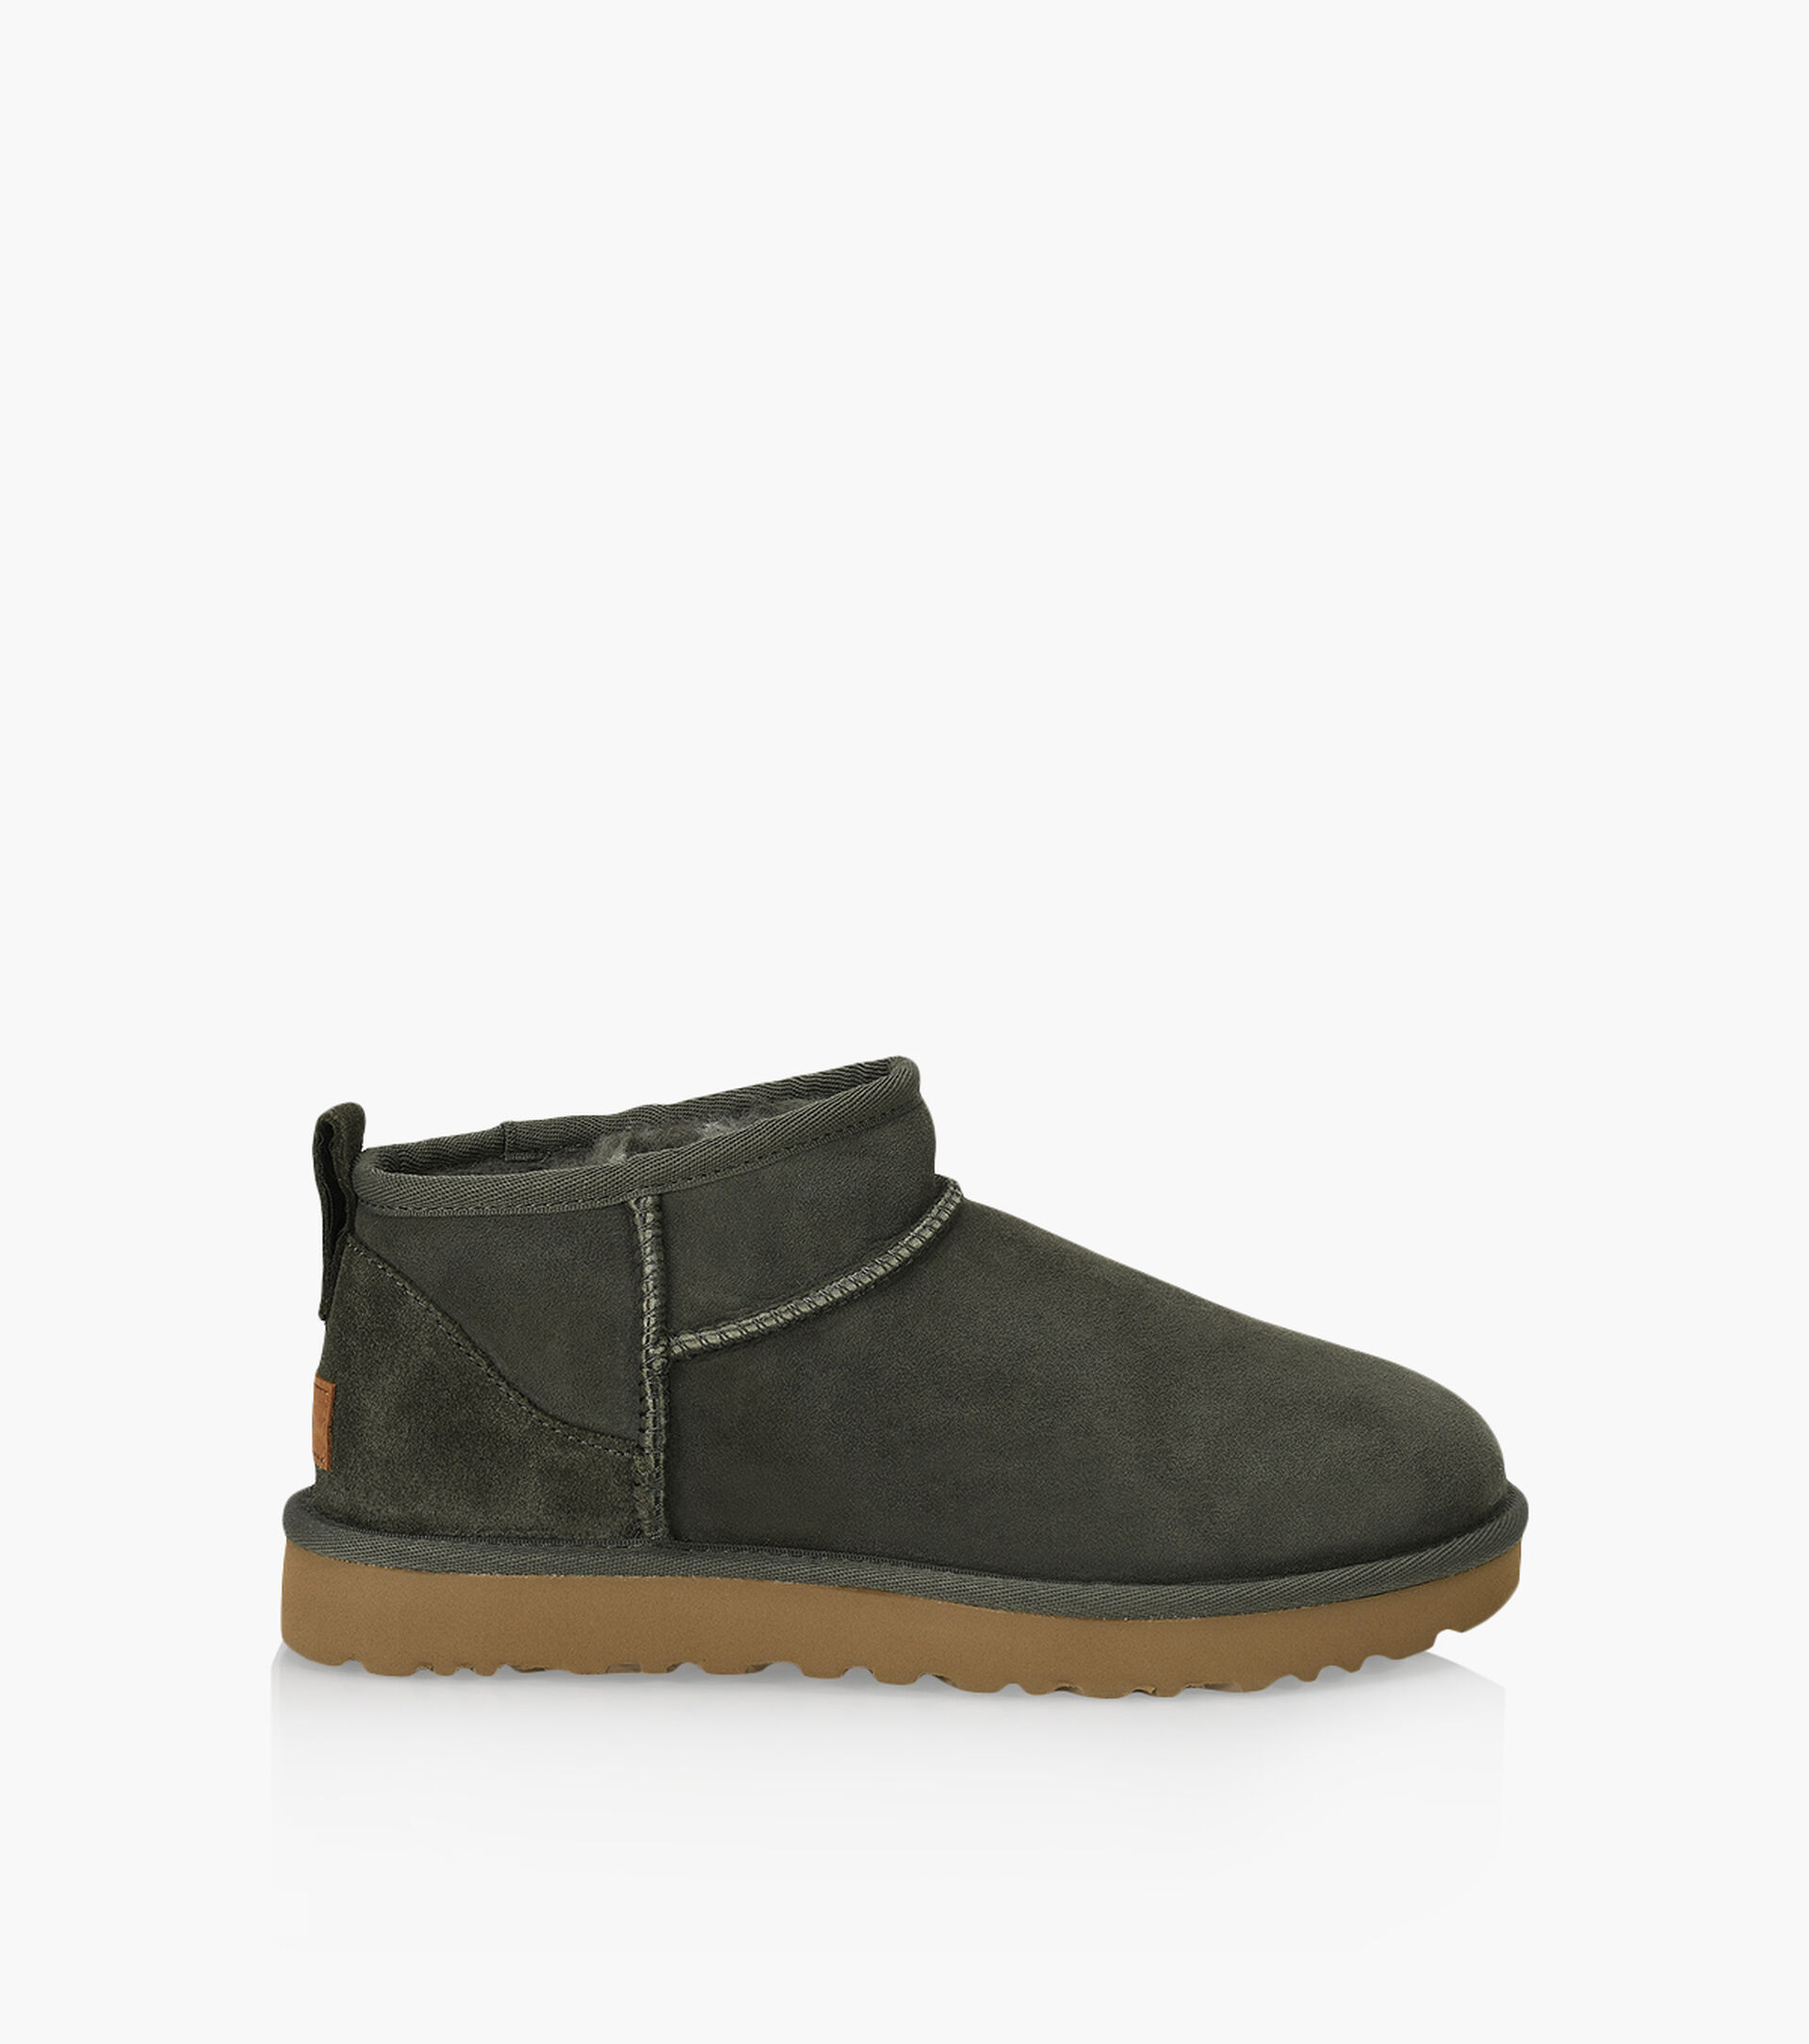 UGG CLASSIC ULTRA MINI - Suede | Browns Shoes